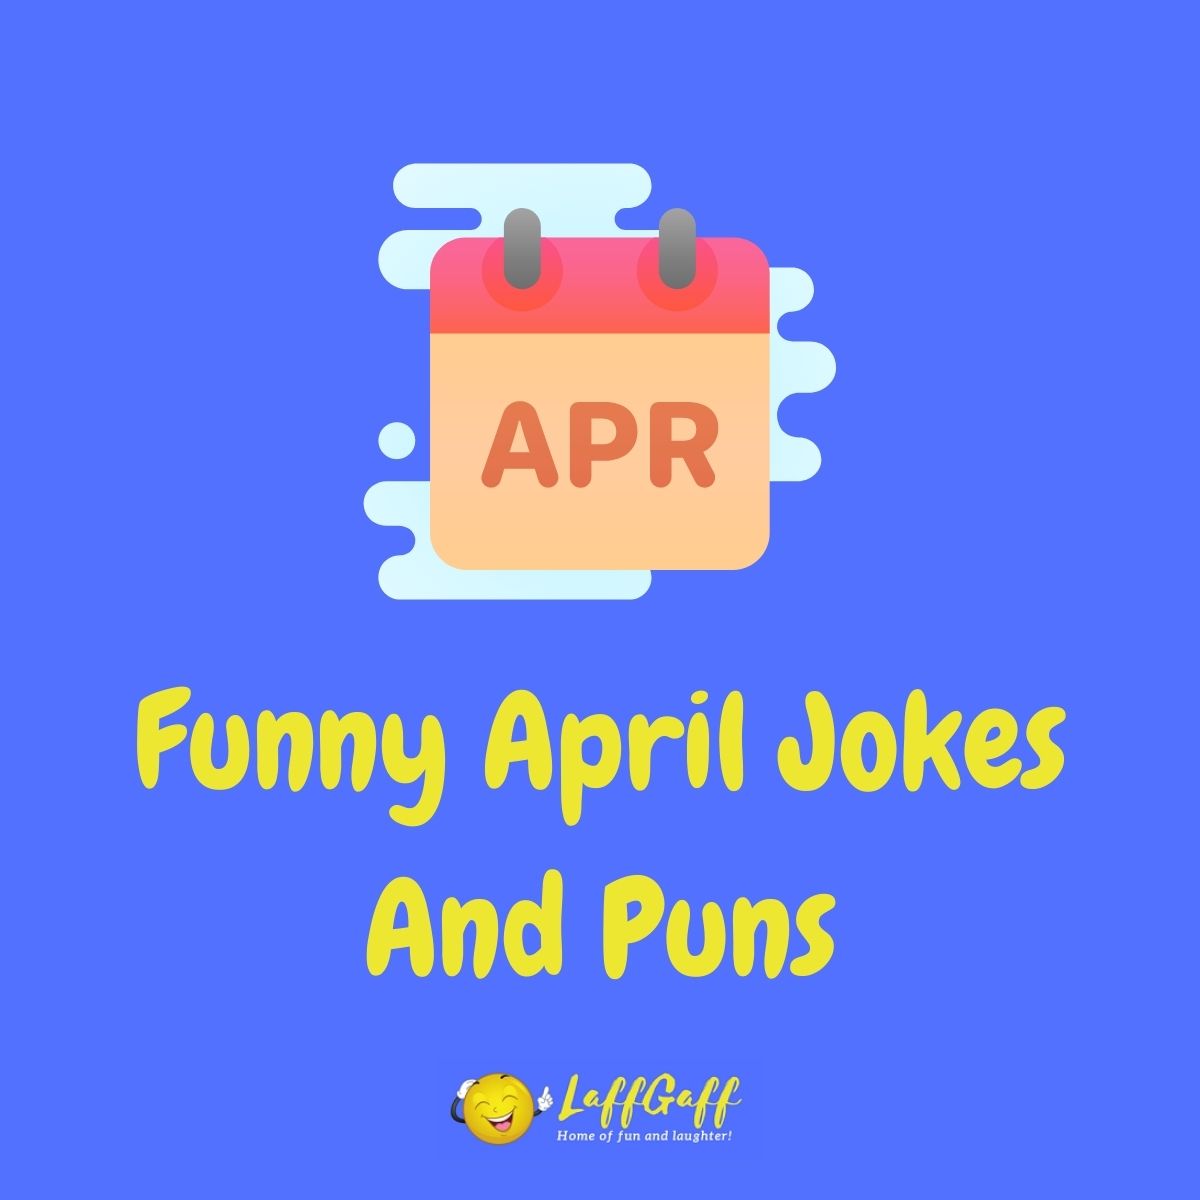 Featured image for a page of funny April jokes and puns.